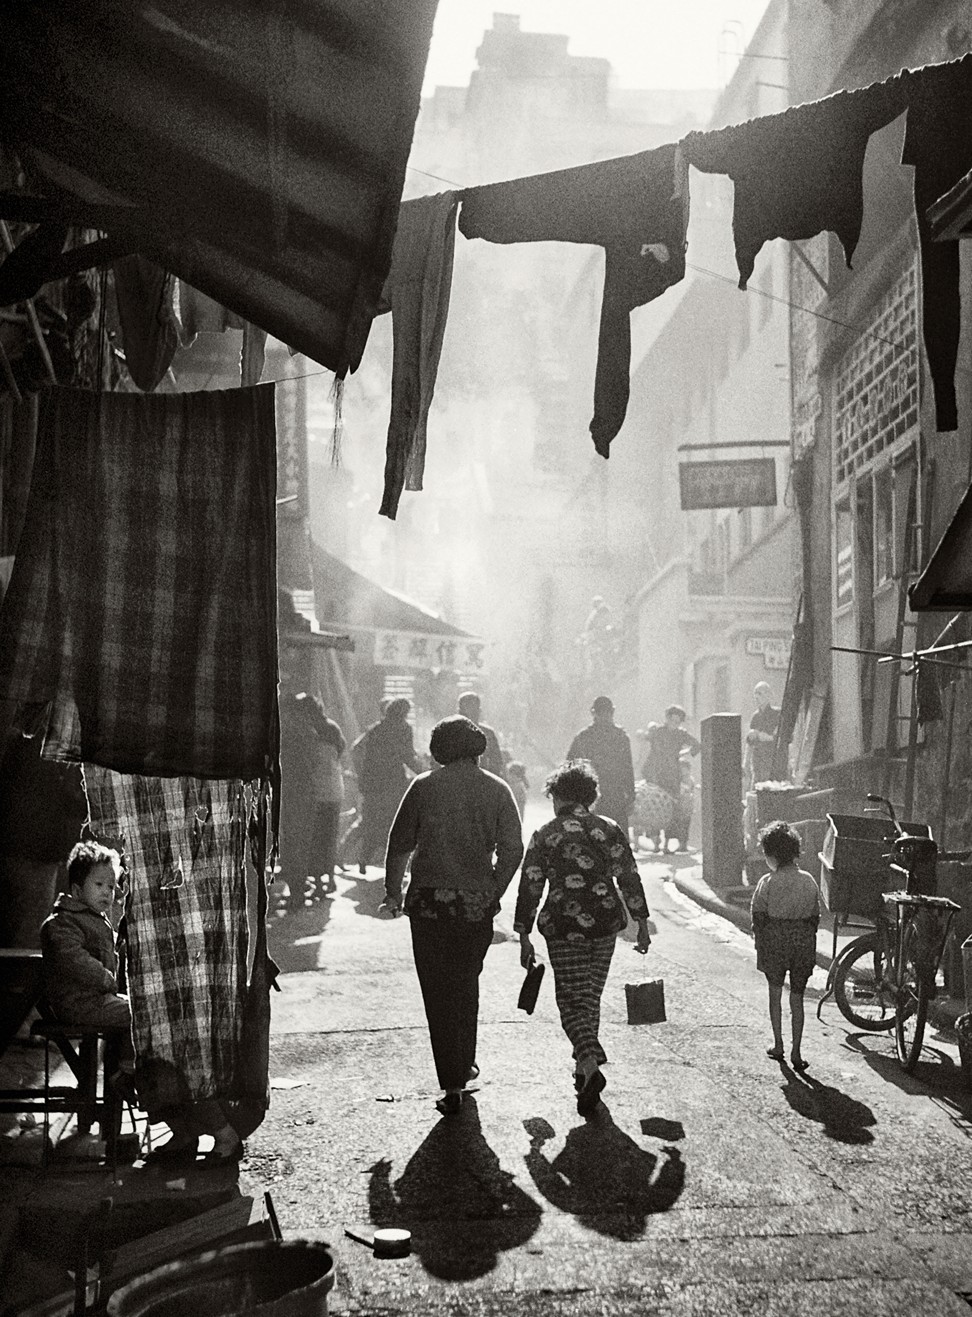 Strolling to Tai Ping Shan Street, , a photo from Fan Ho’s series portraying Hong Kong in the 1950s and 1960s. Photo: Fan Ho